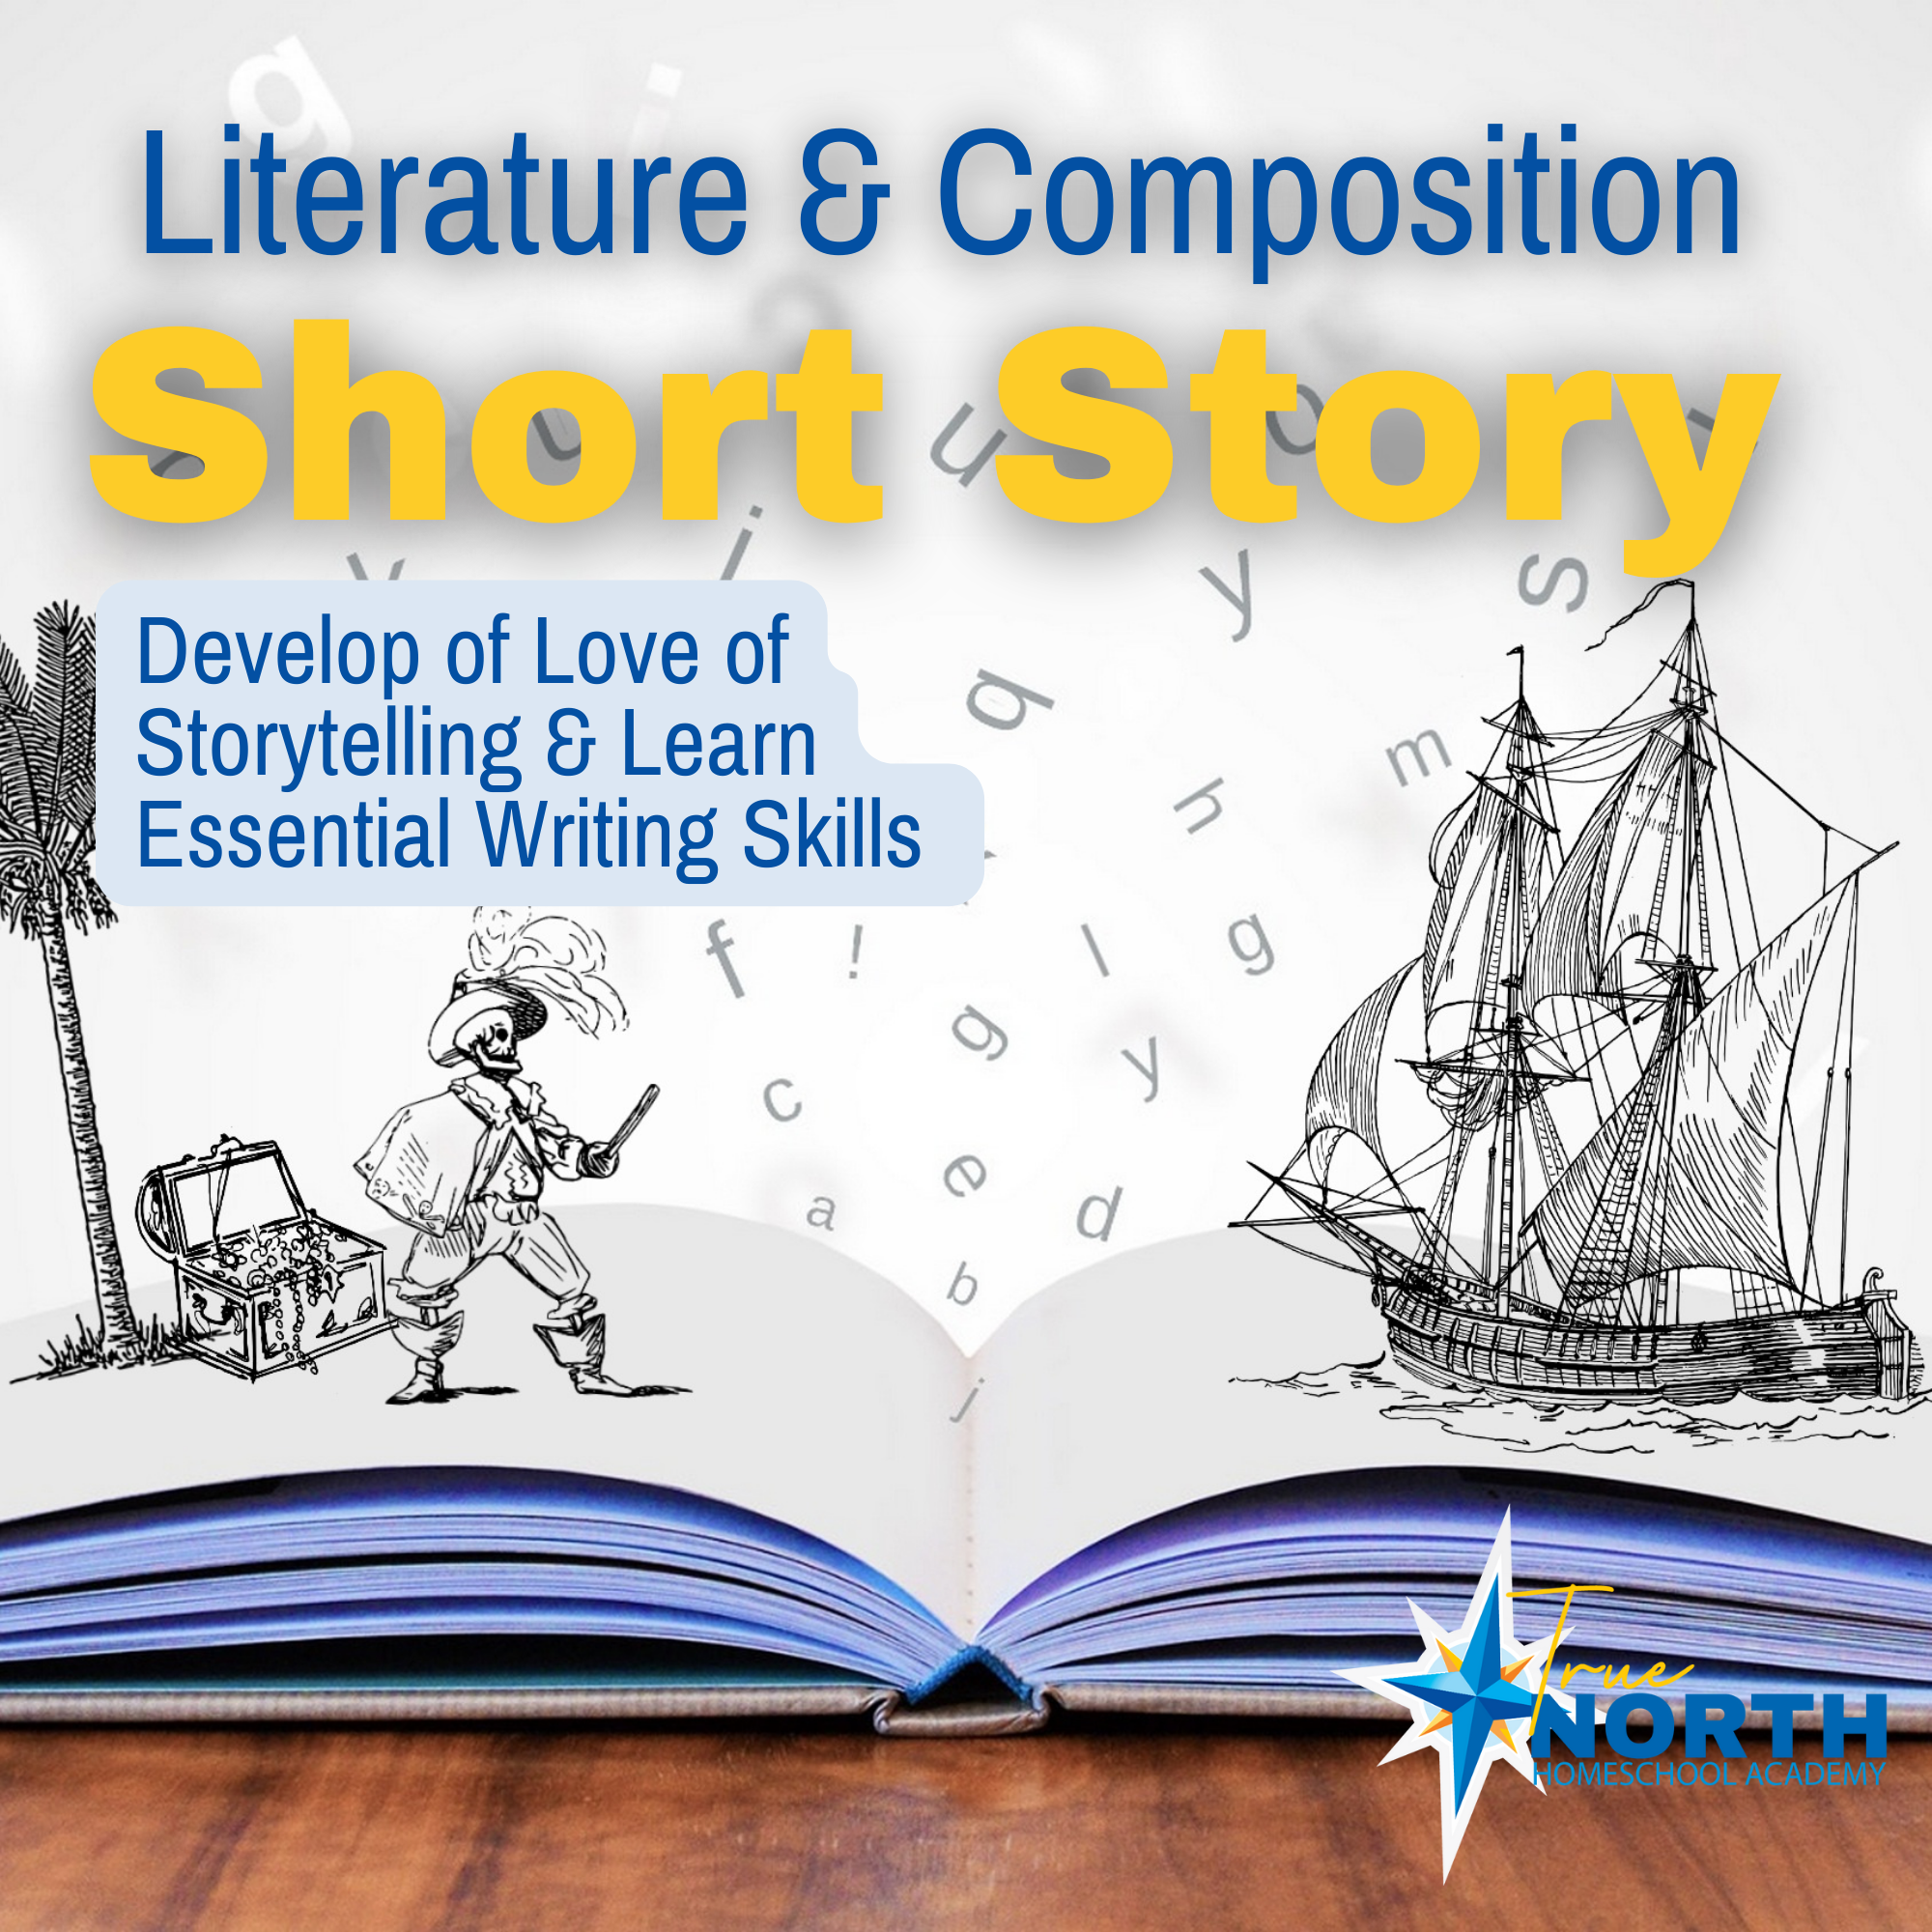 shor story lit and comp high school class for true north homeschool academy